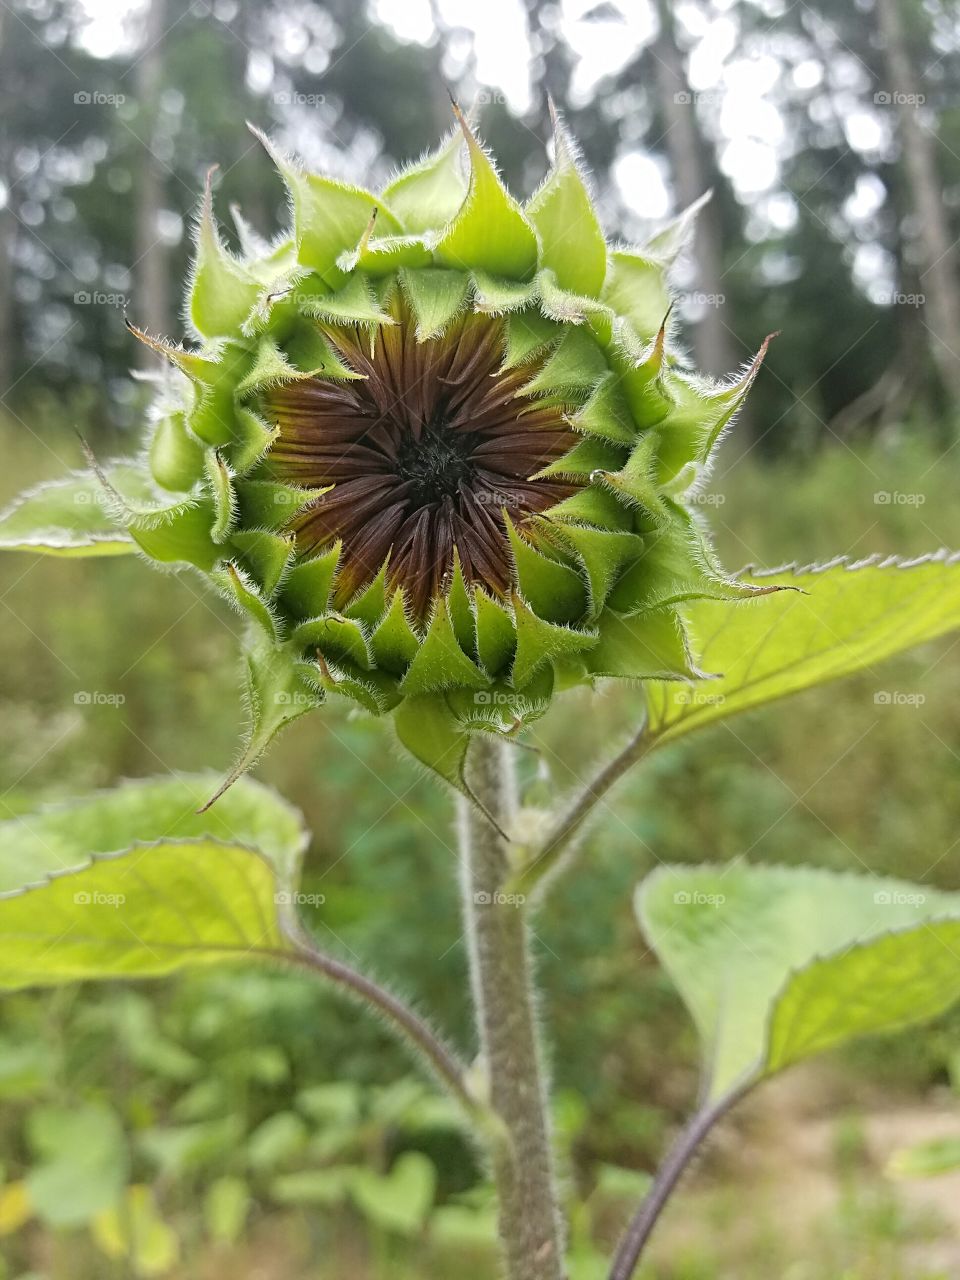 sunflower ready to bloom